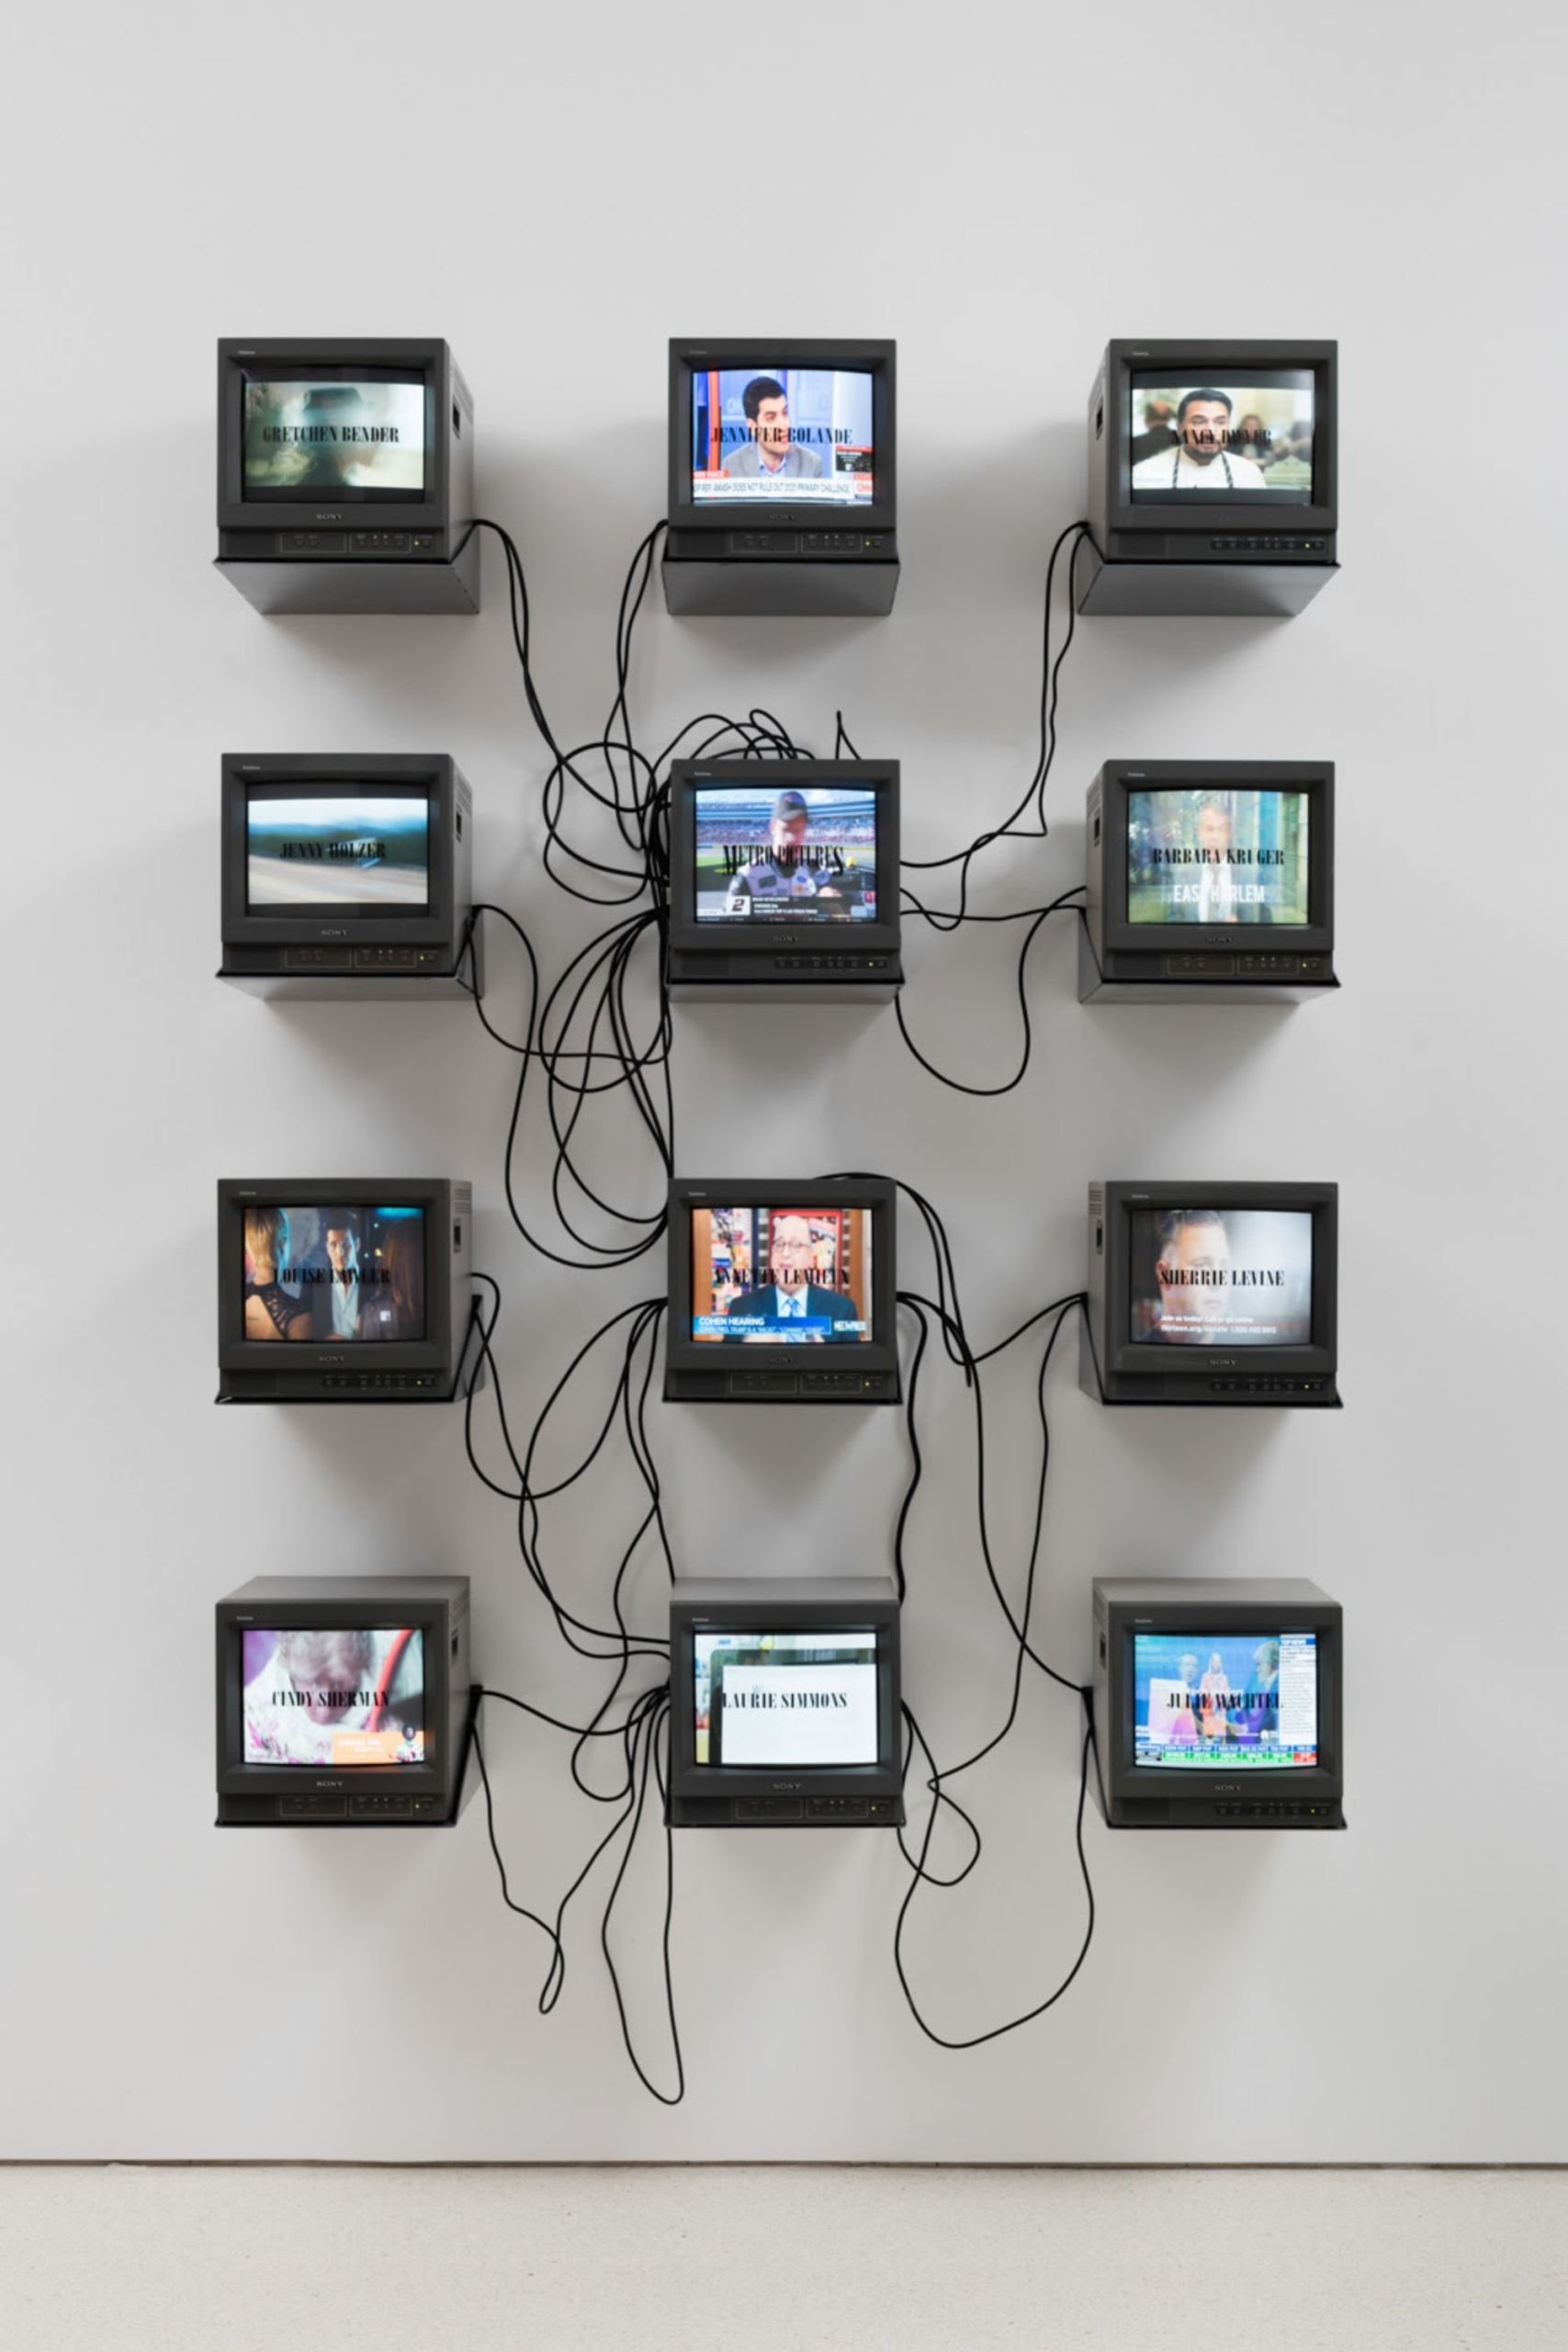 Metro Pictures, Gretchen Bender_TV Text and Image (Metro Pictures Version), 1986